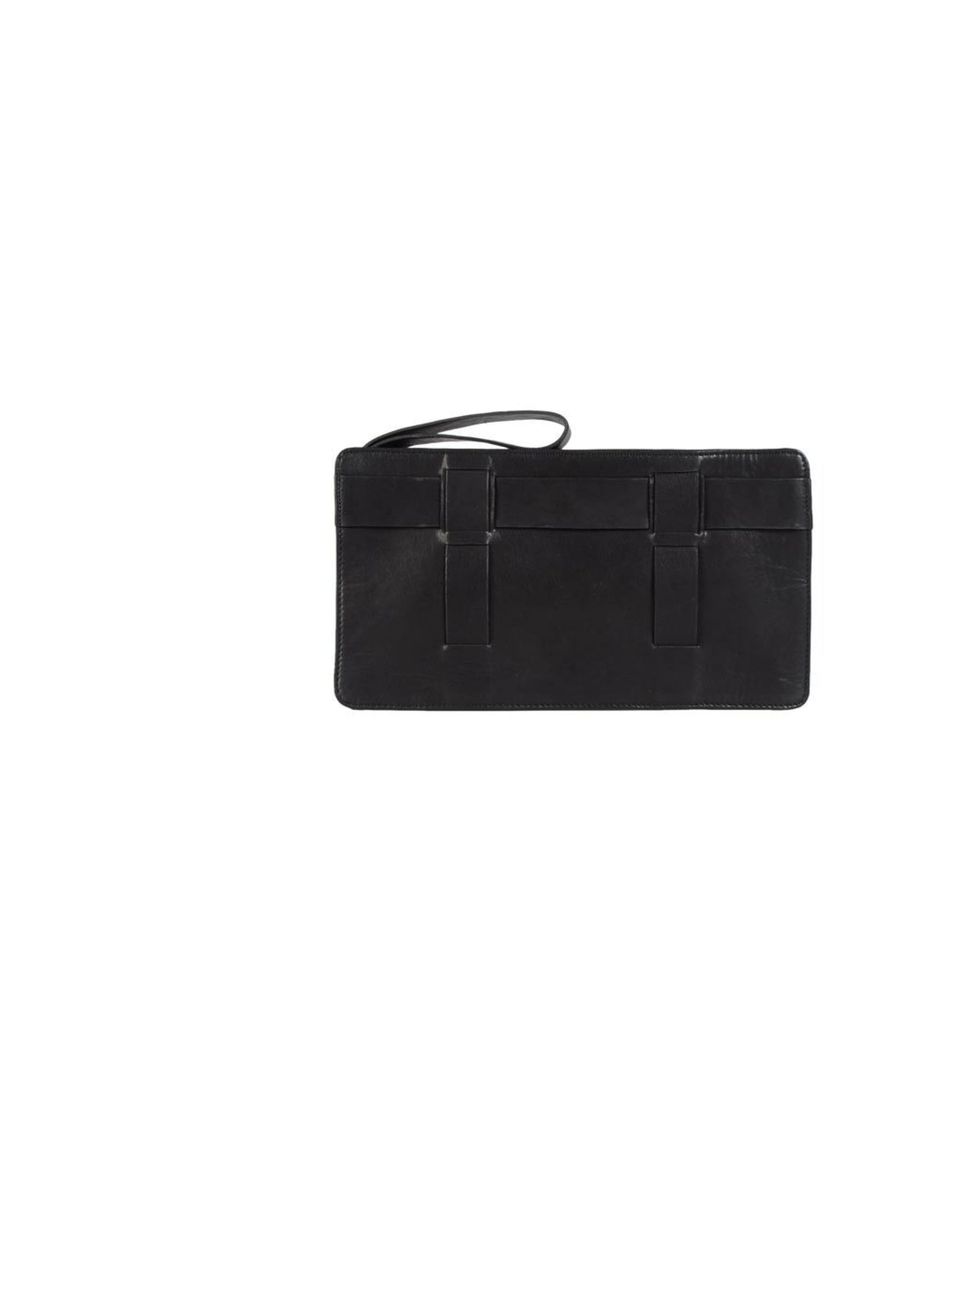 <p>Filippa K 'Margo' clutch bag, £118, at <a href="http://nelly.com/uk/womens-fashion/accessories/bags/filippa-k-676/margo-clutch-676477-14/">nelly.com</a></p>